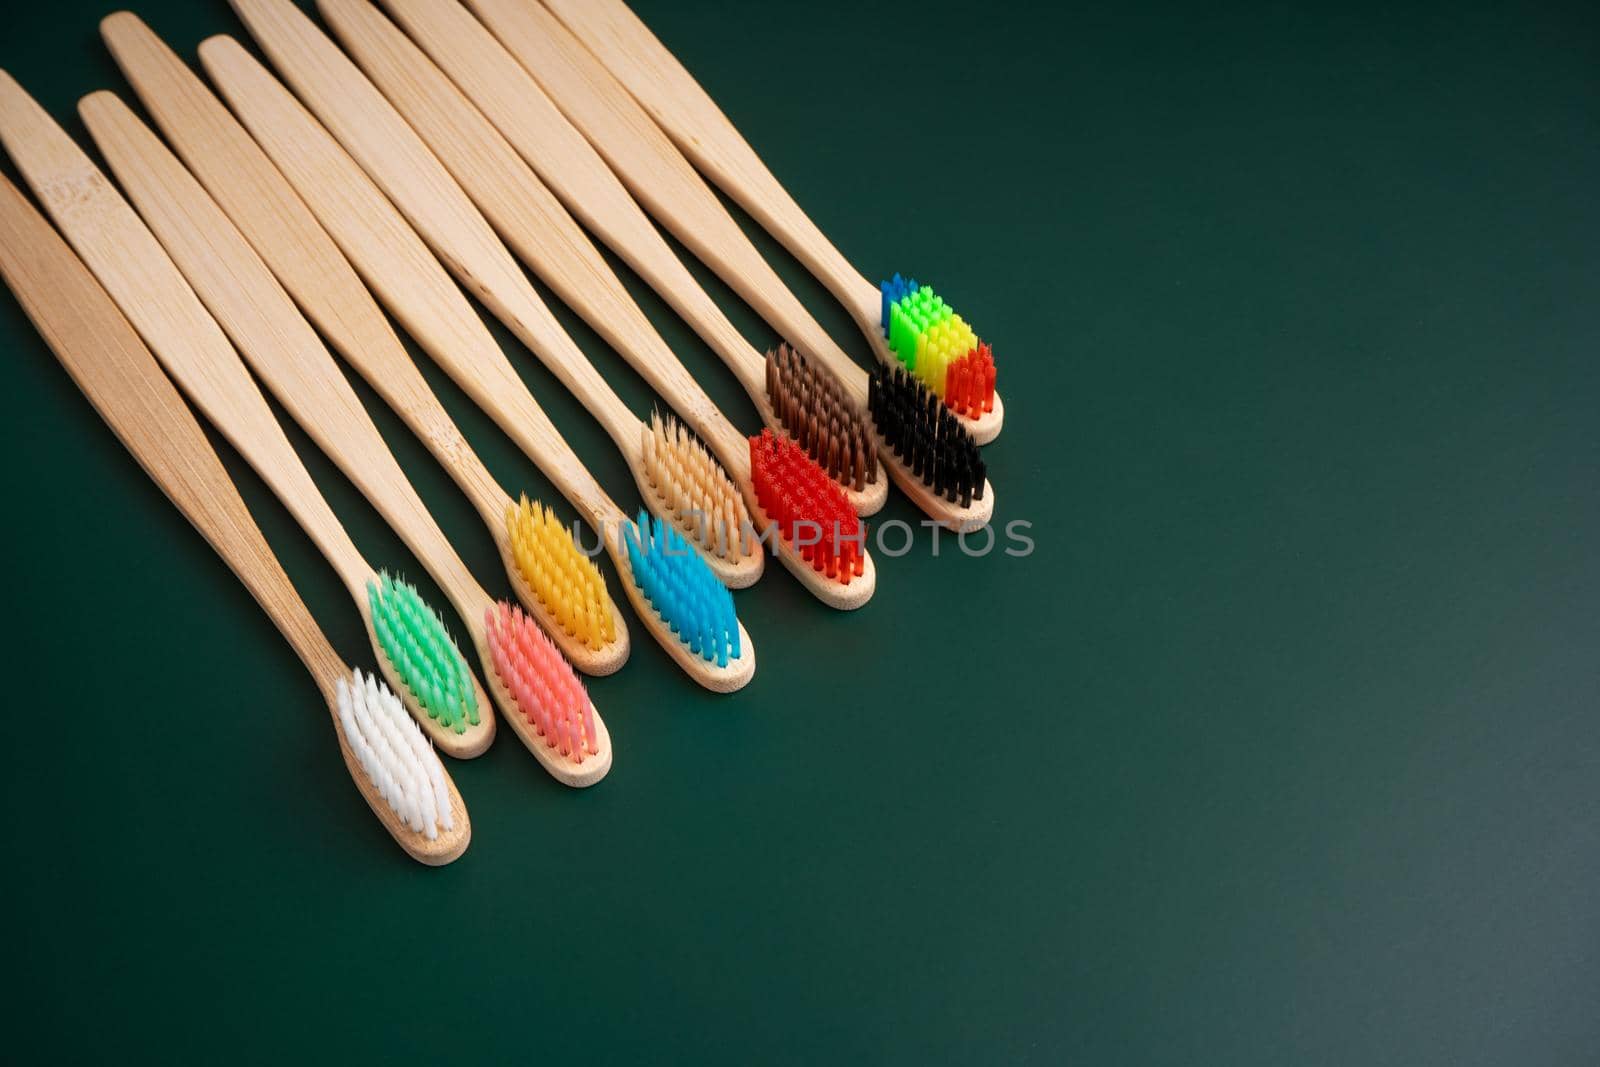 A set of Eco-friendly antibacterial toothbrushes made of bamboo wood on a dark green background. Environmental trends by Try_my_best